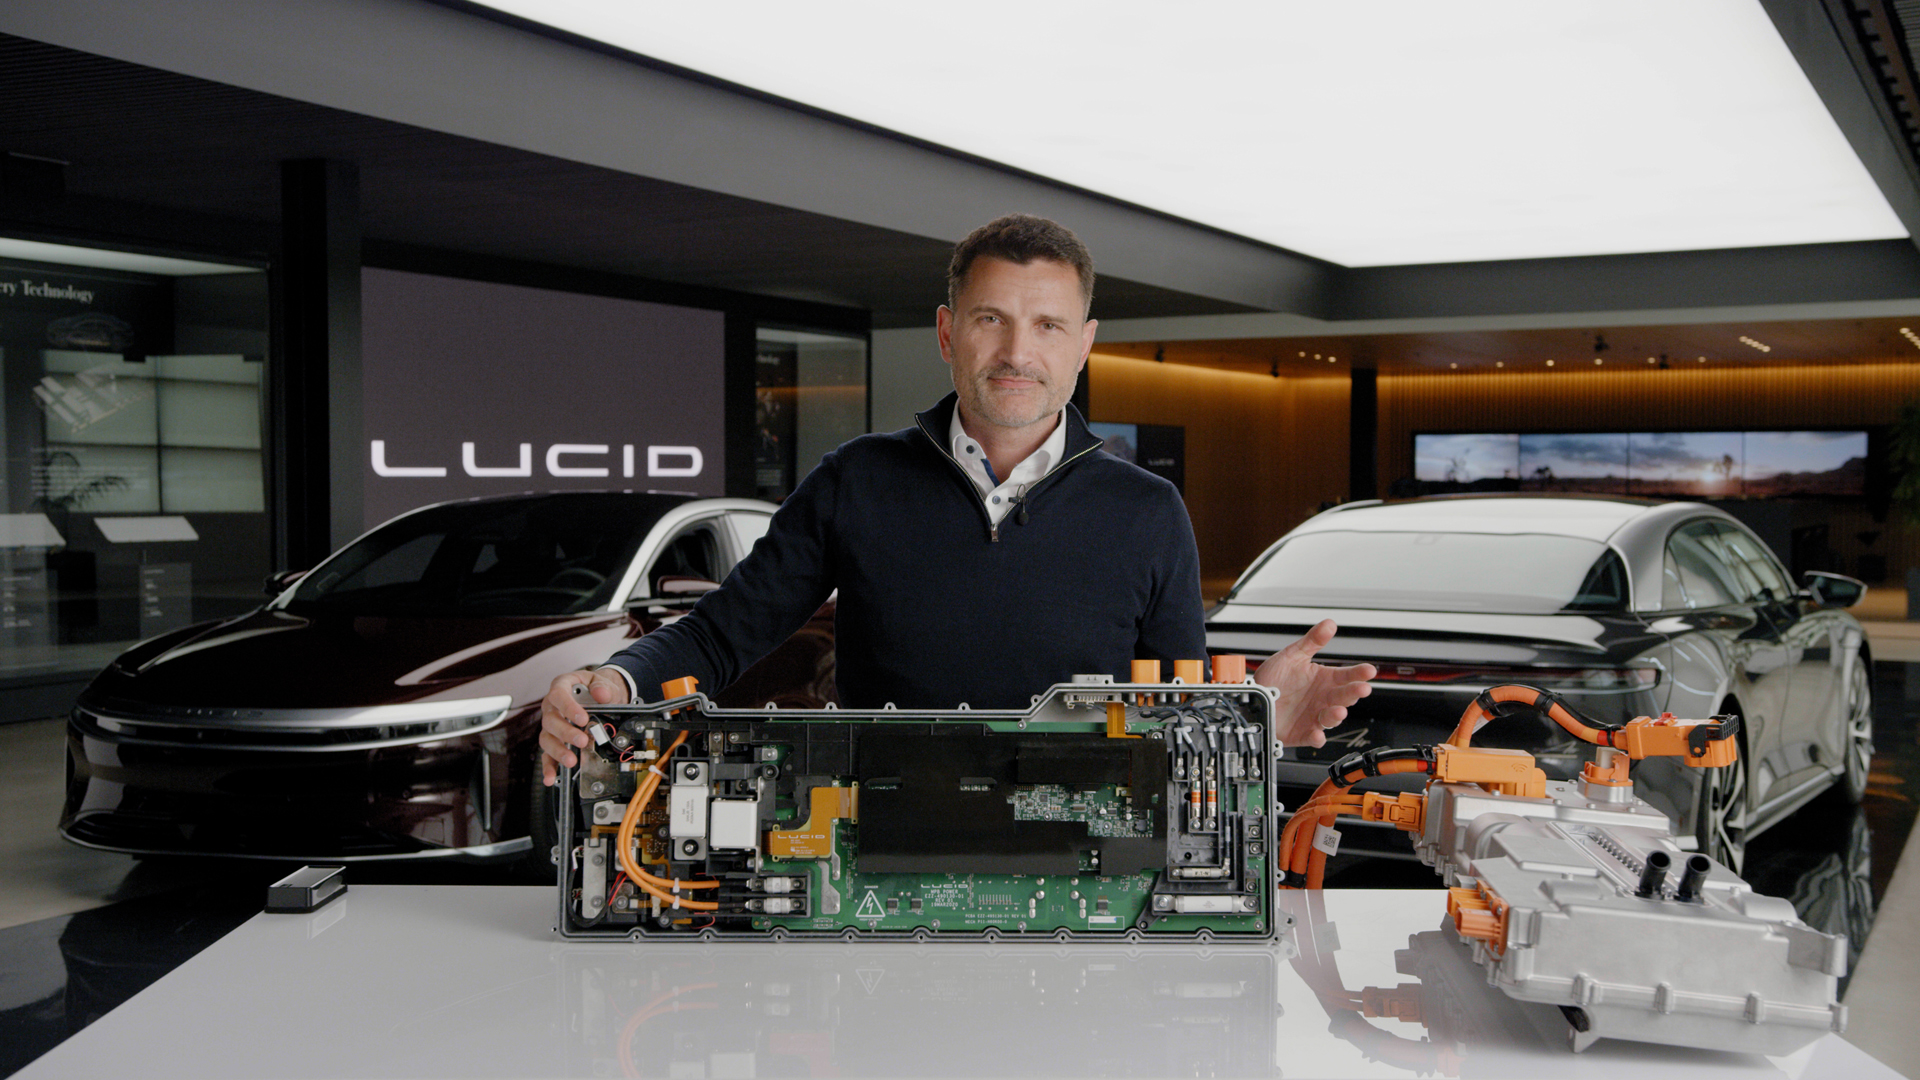 Lucid Motors Tech Talk On Wunderbox, Electric Vehicle Charging System